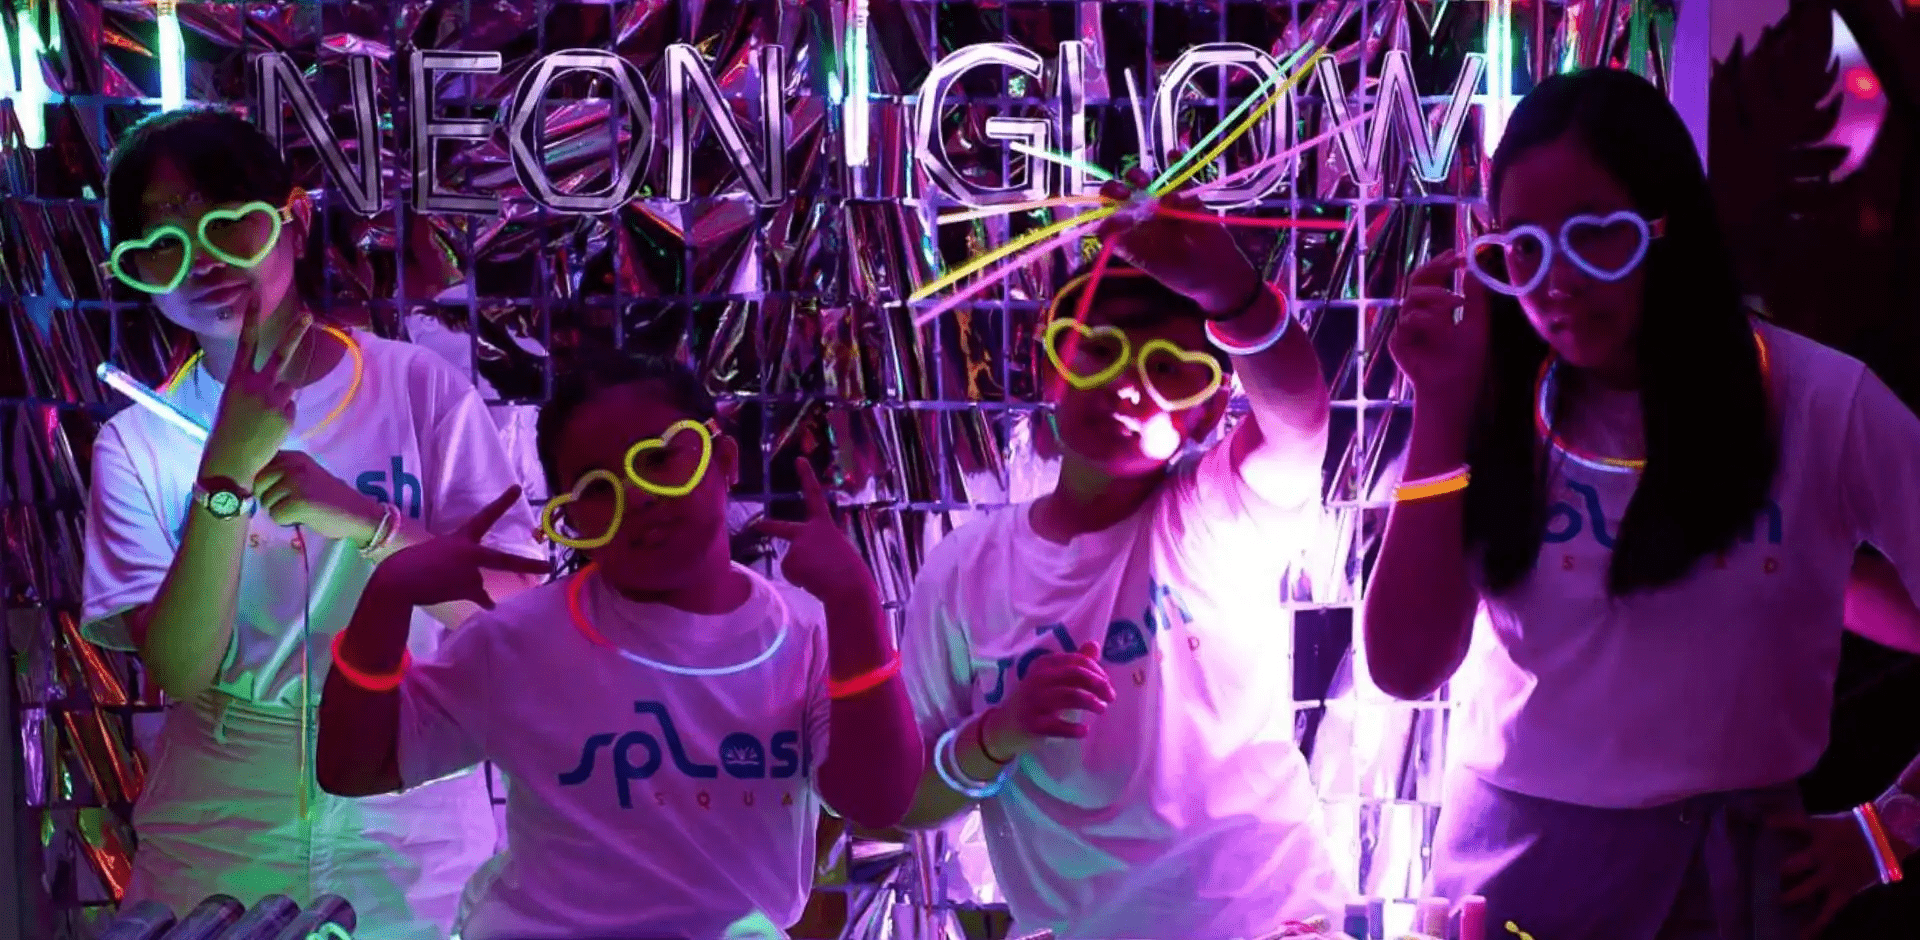 Hotels with Kids Clubs - neon glow parties for kids